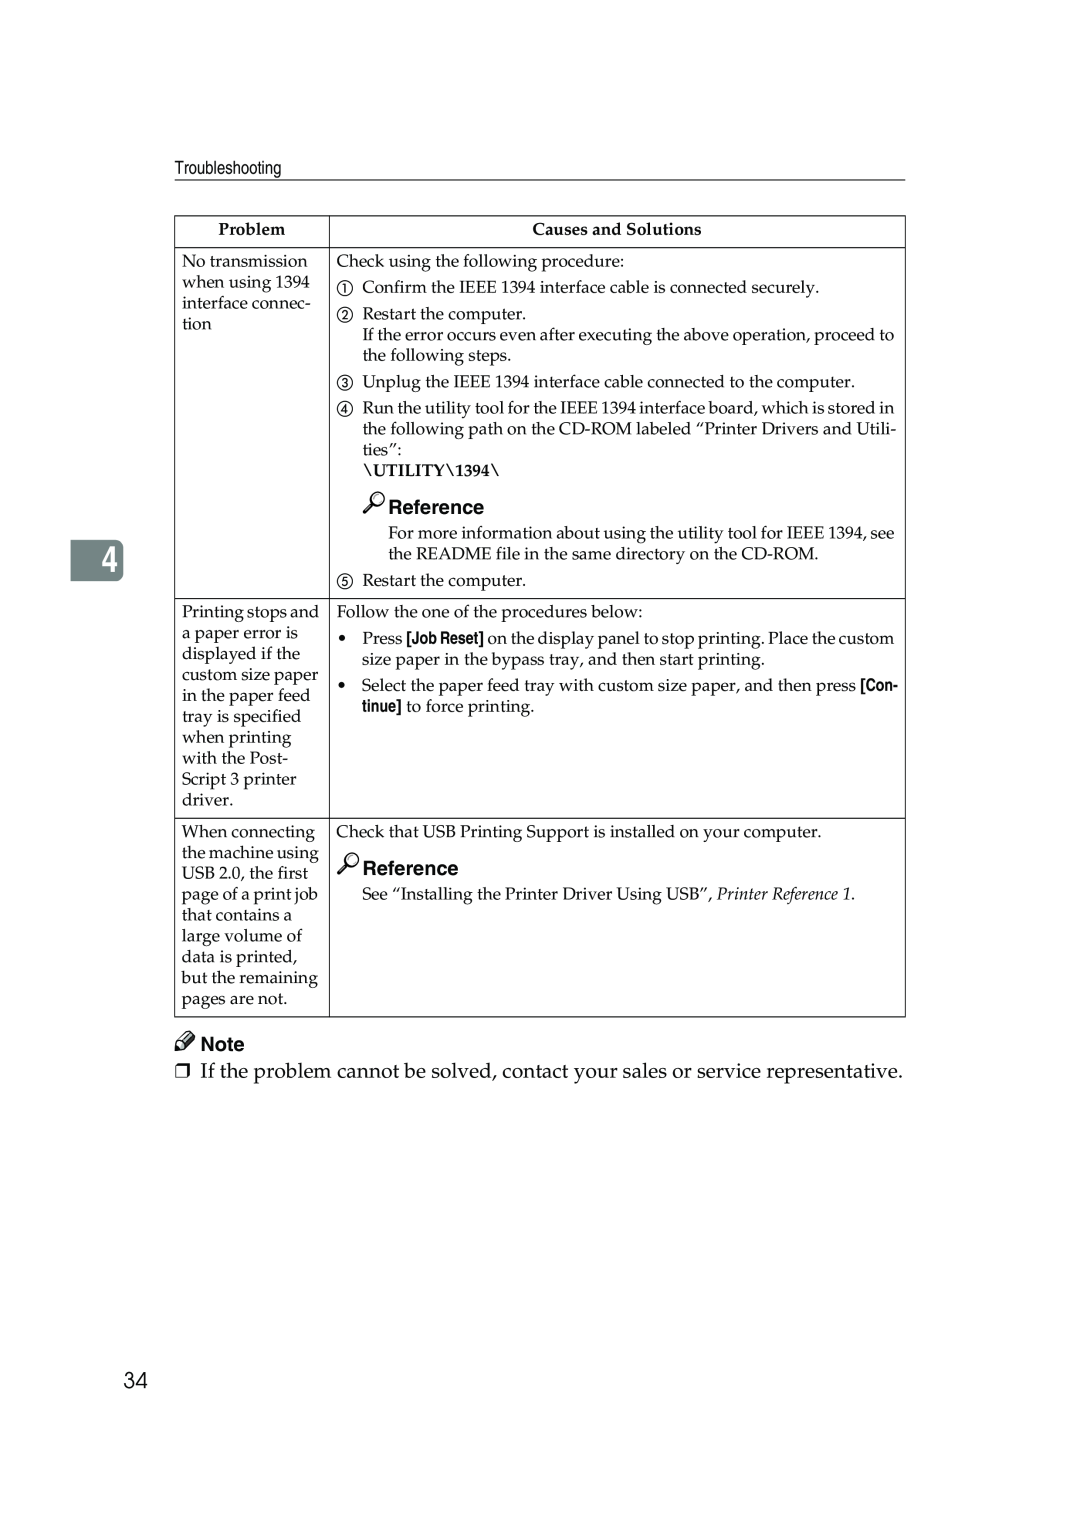 Xerox 2045e appendix Reference, Problem, Causes and Solutions, UTILITY\1394 